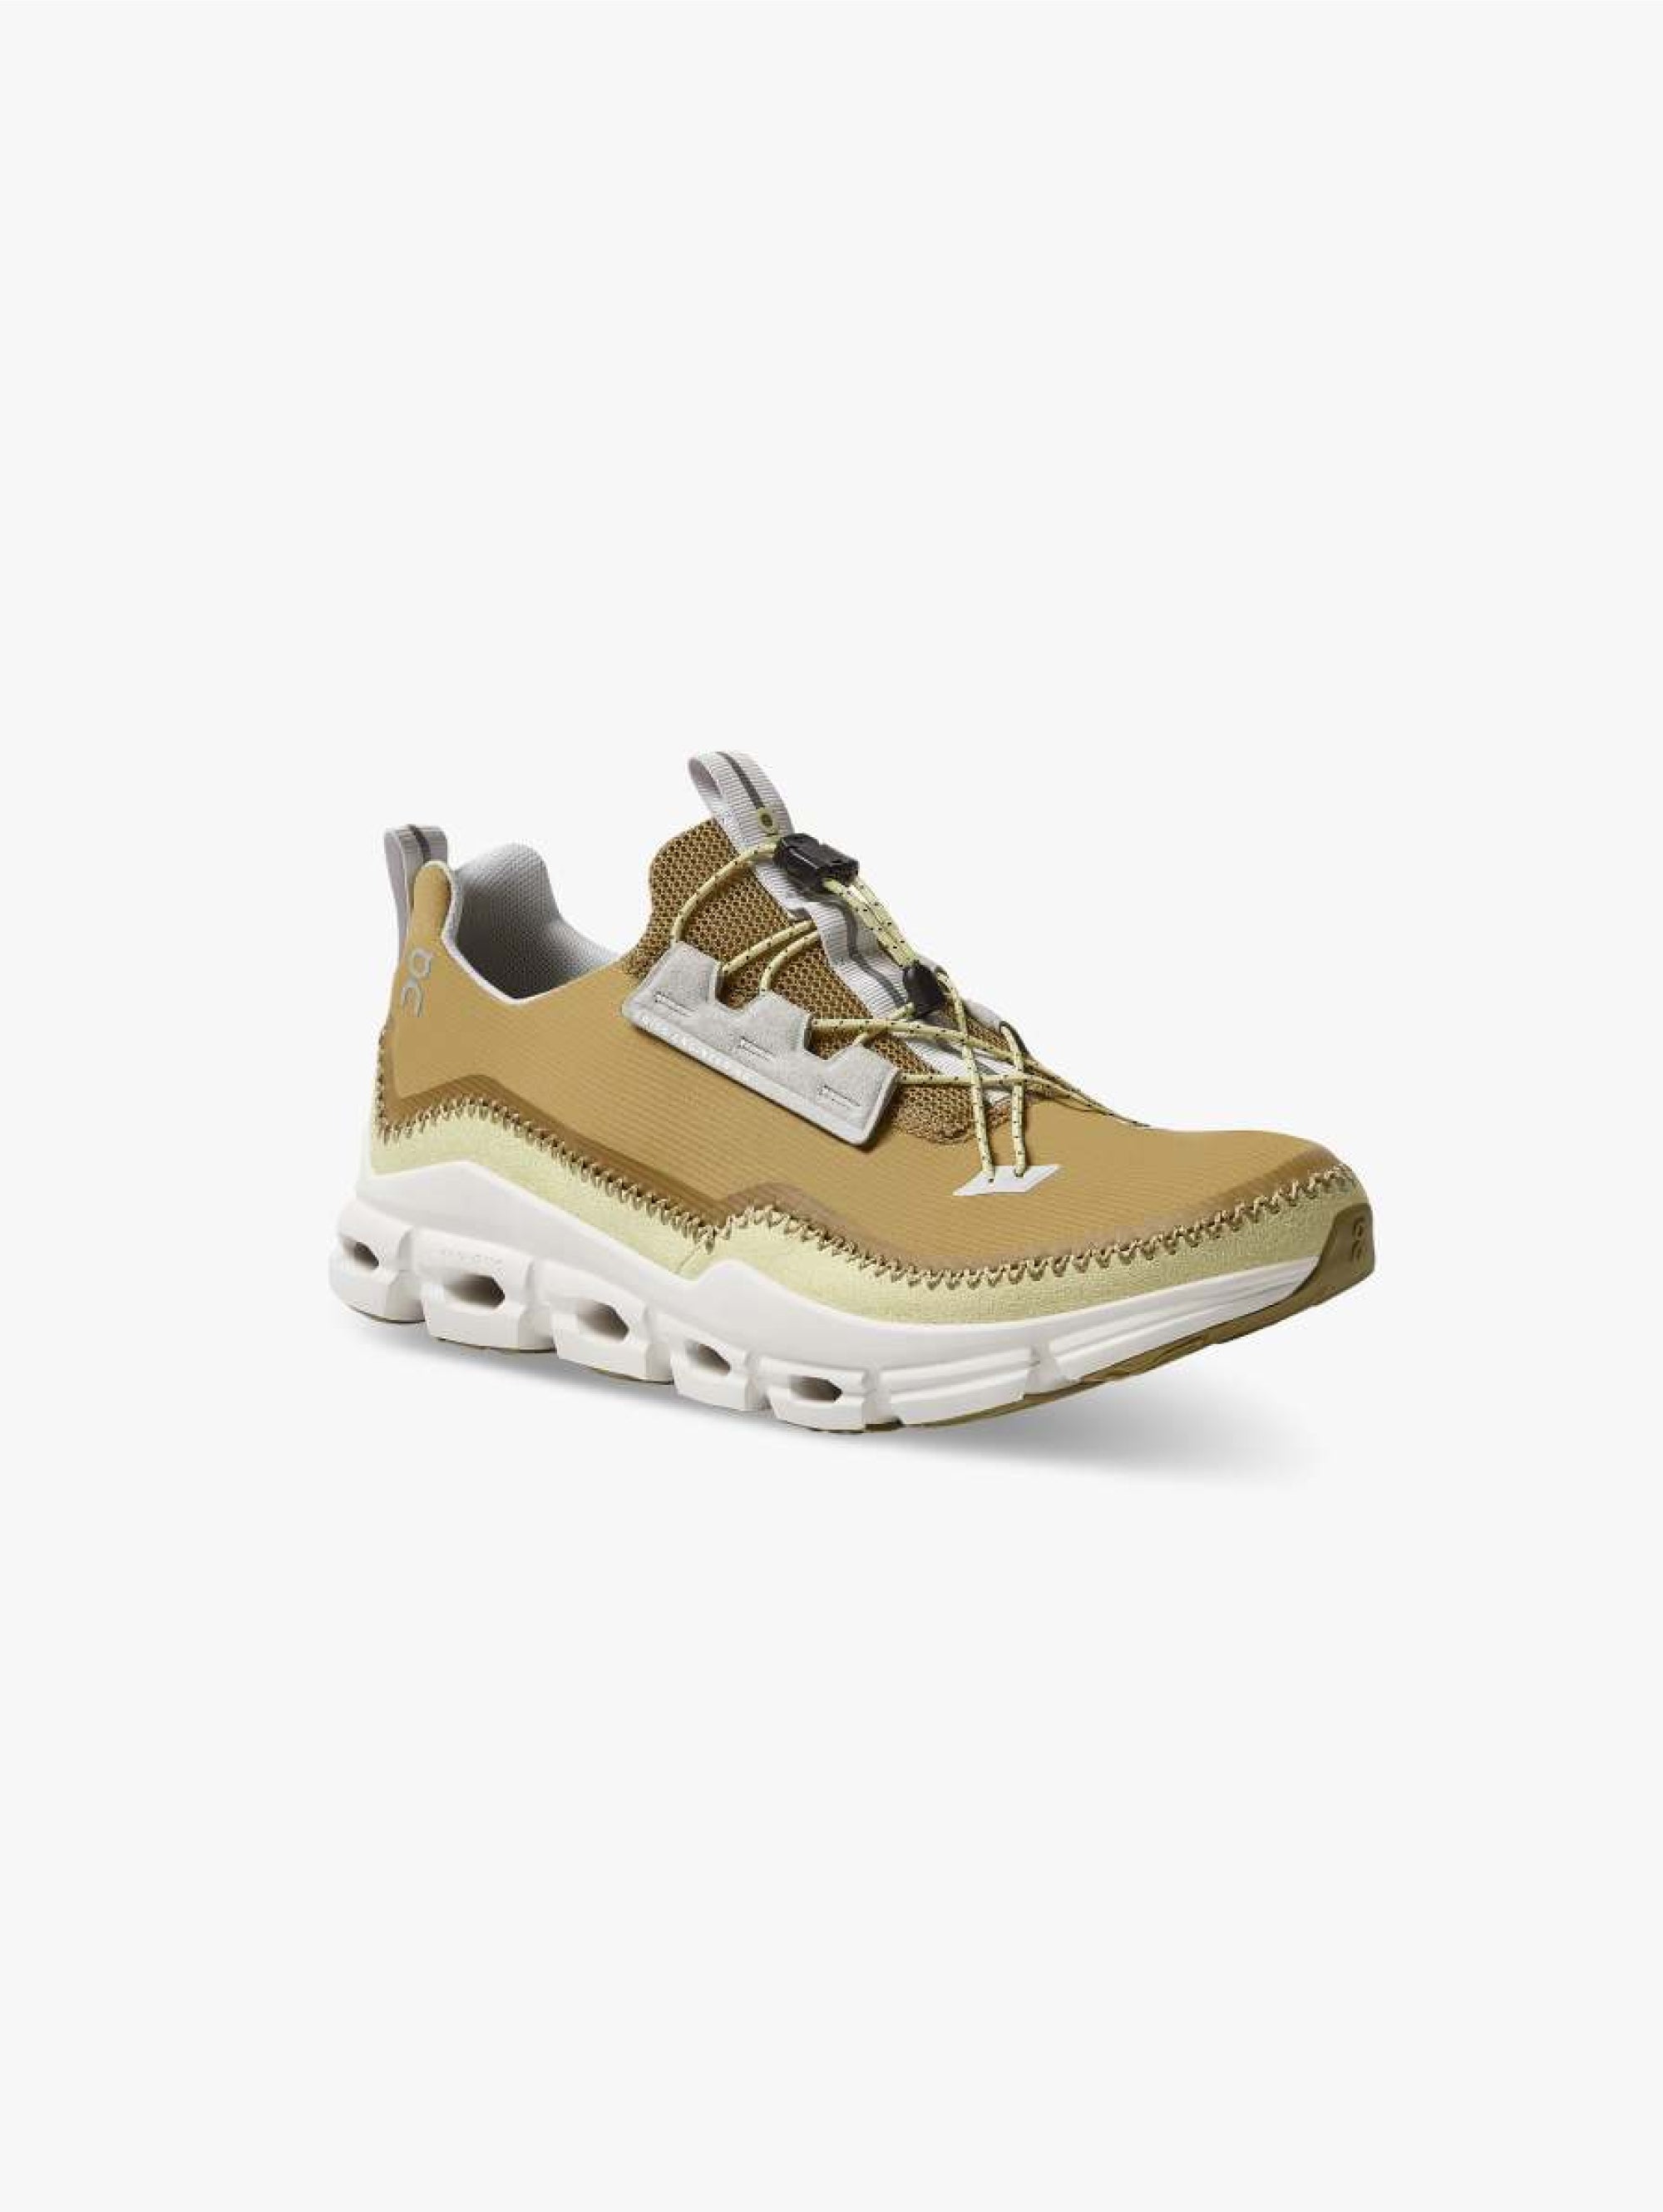 Sneakers with Cloudaway Bronze / White stitching